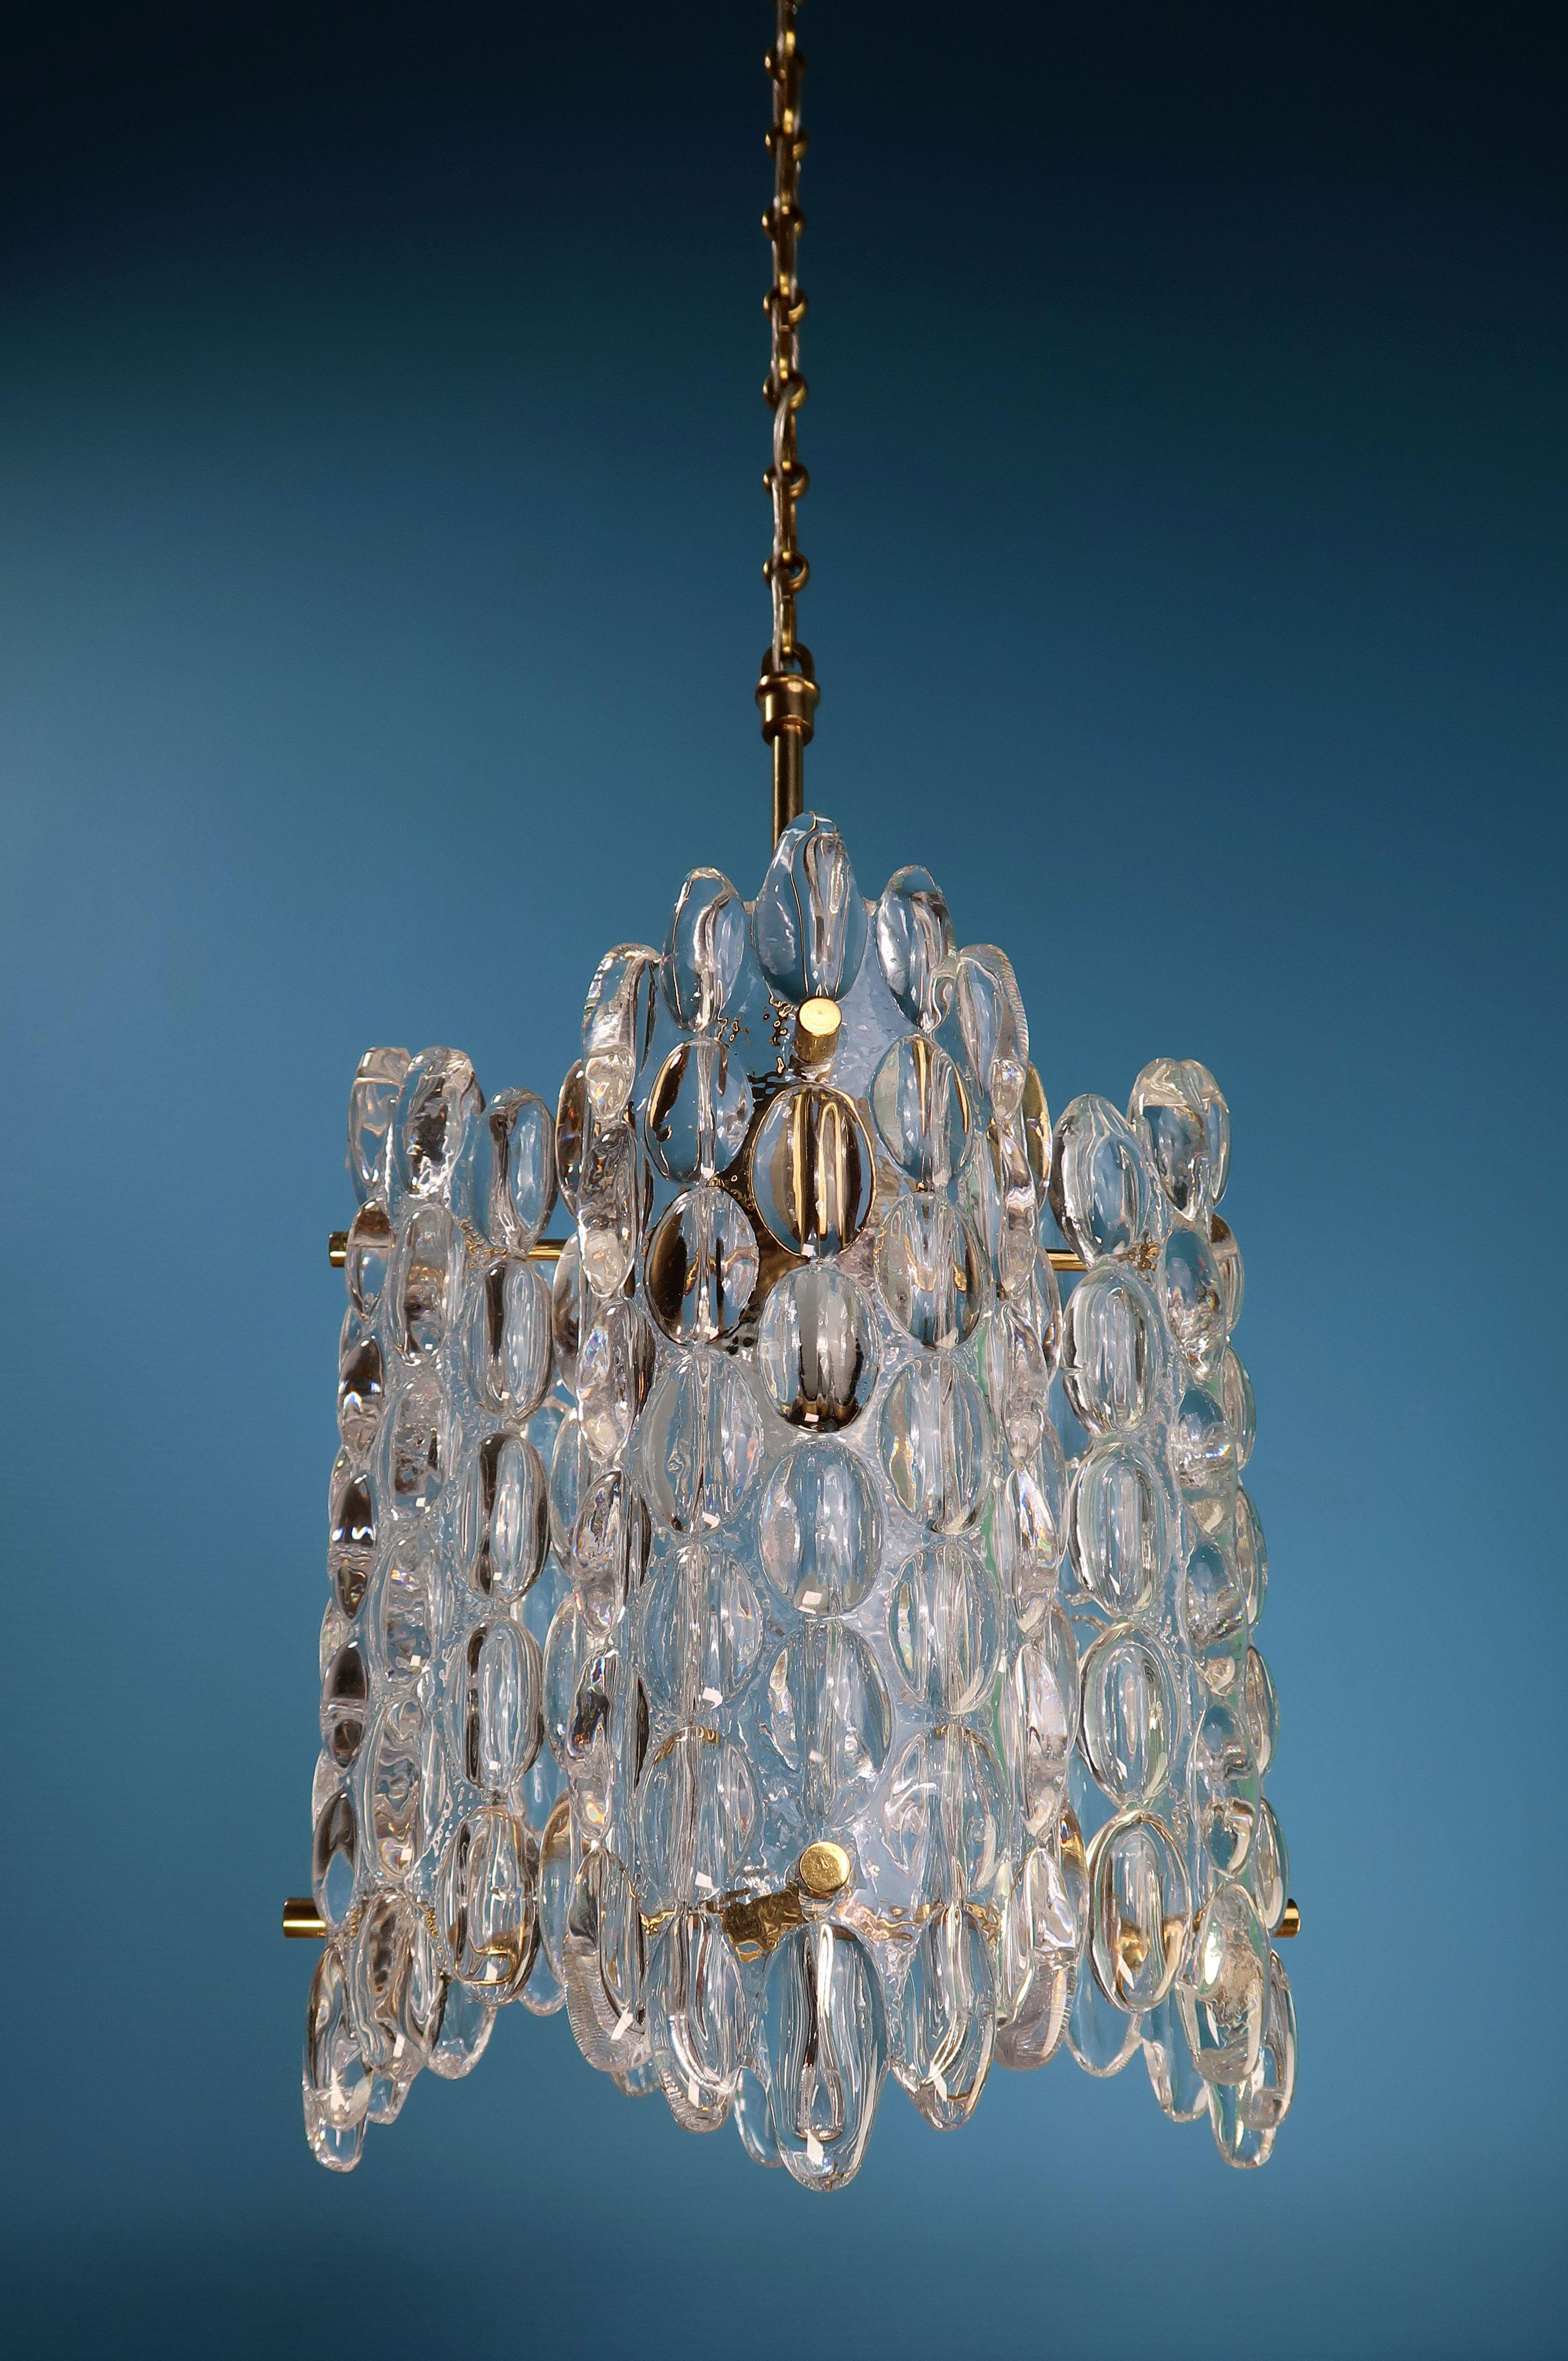 Iconic Swedish Mid-Century Modern crystal chandelier composed of four rounded and bubble textured crystal plates on polished brass mount and brass hardware. By Swedish designer Carl Fagerlund for Orrefors and manufactured in the 1950s. Model